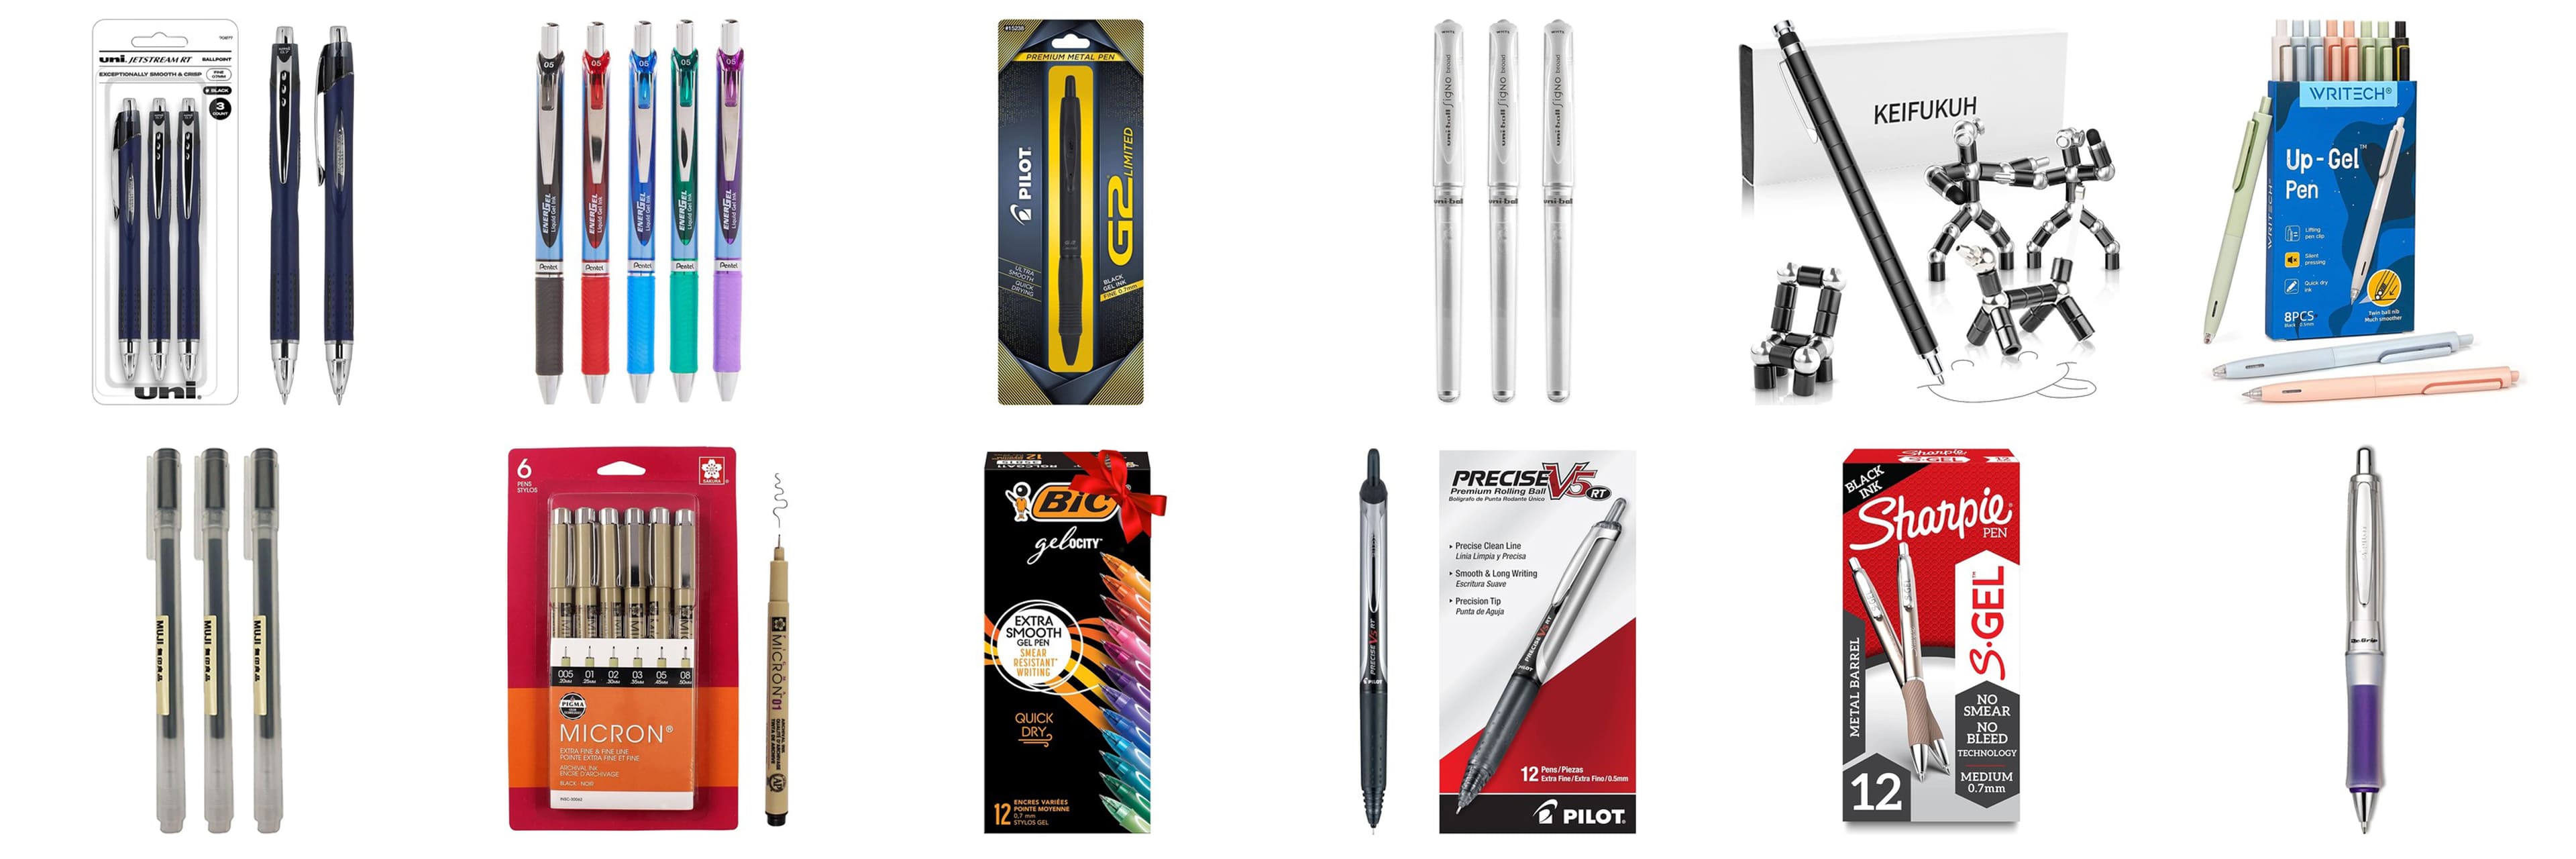 WRITECH Gel Pens Fine Point: Retractable Black Ink 1 Count (Pack of 8)